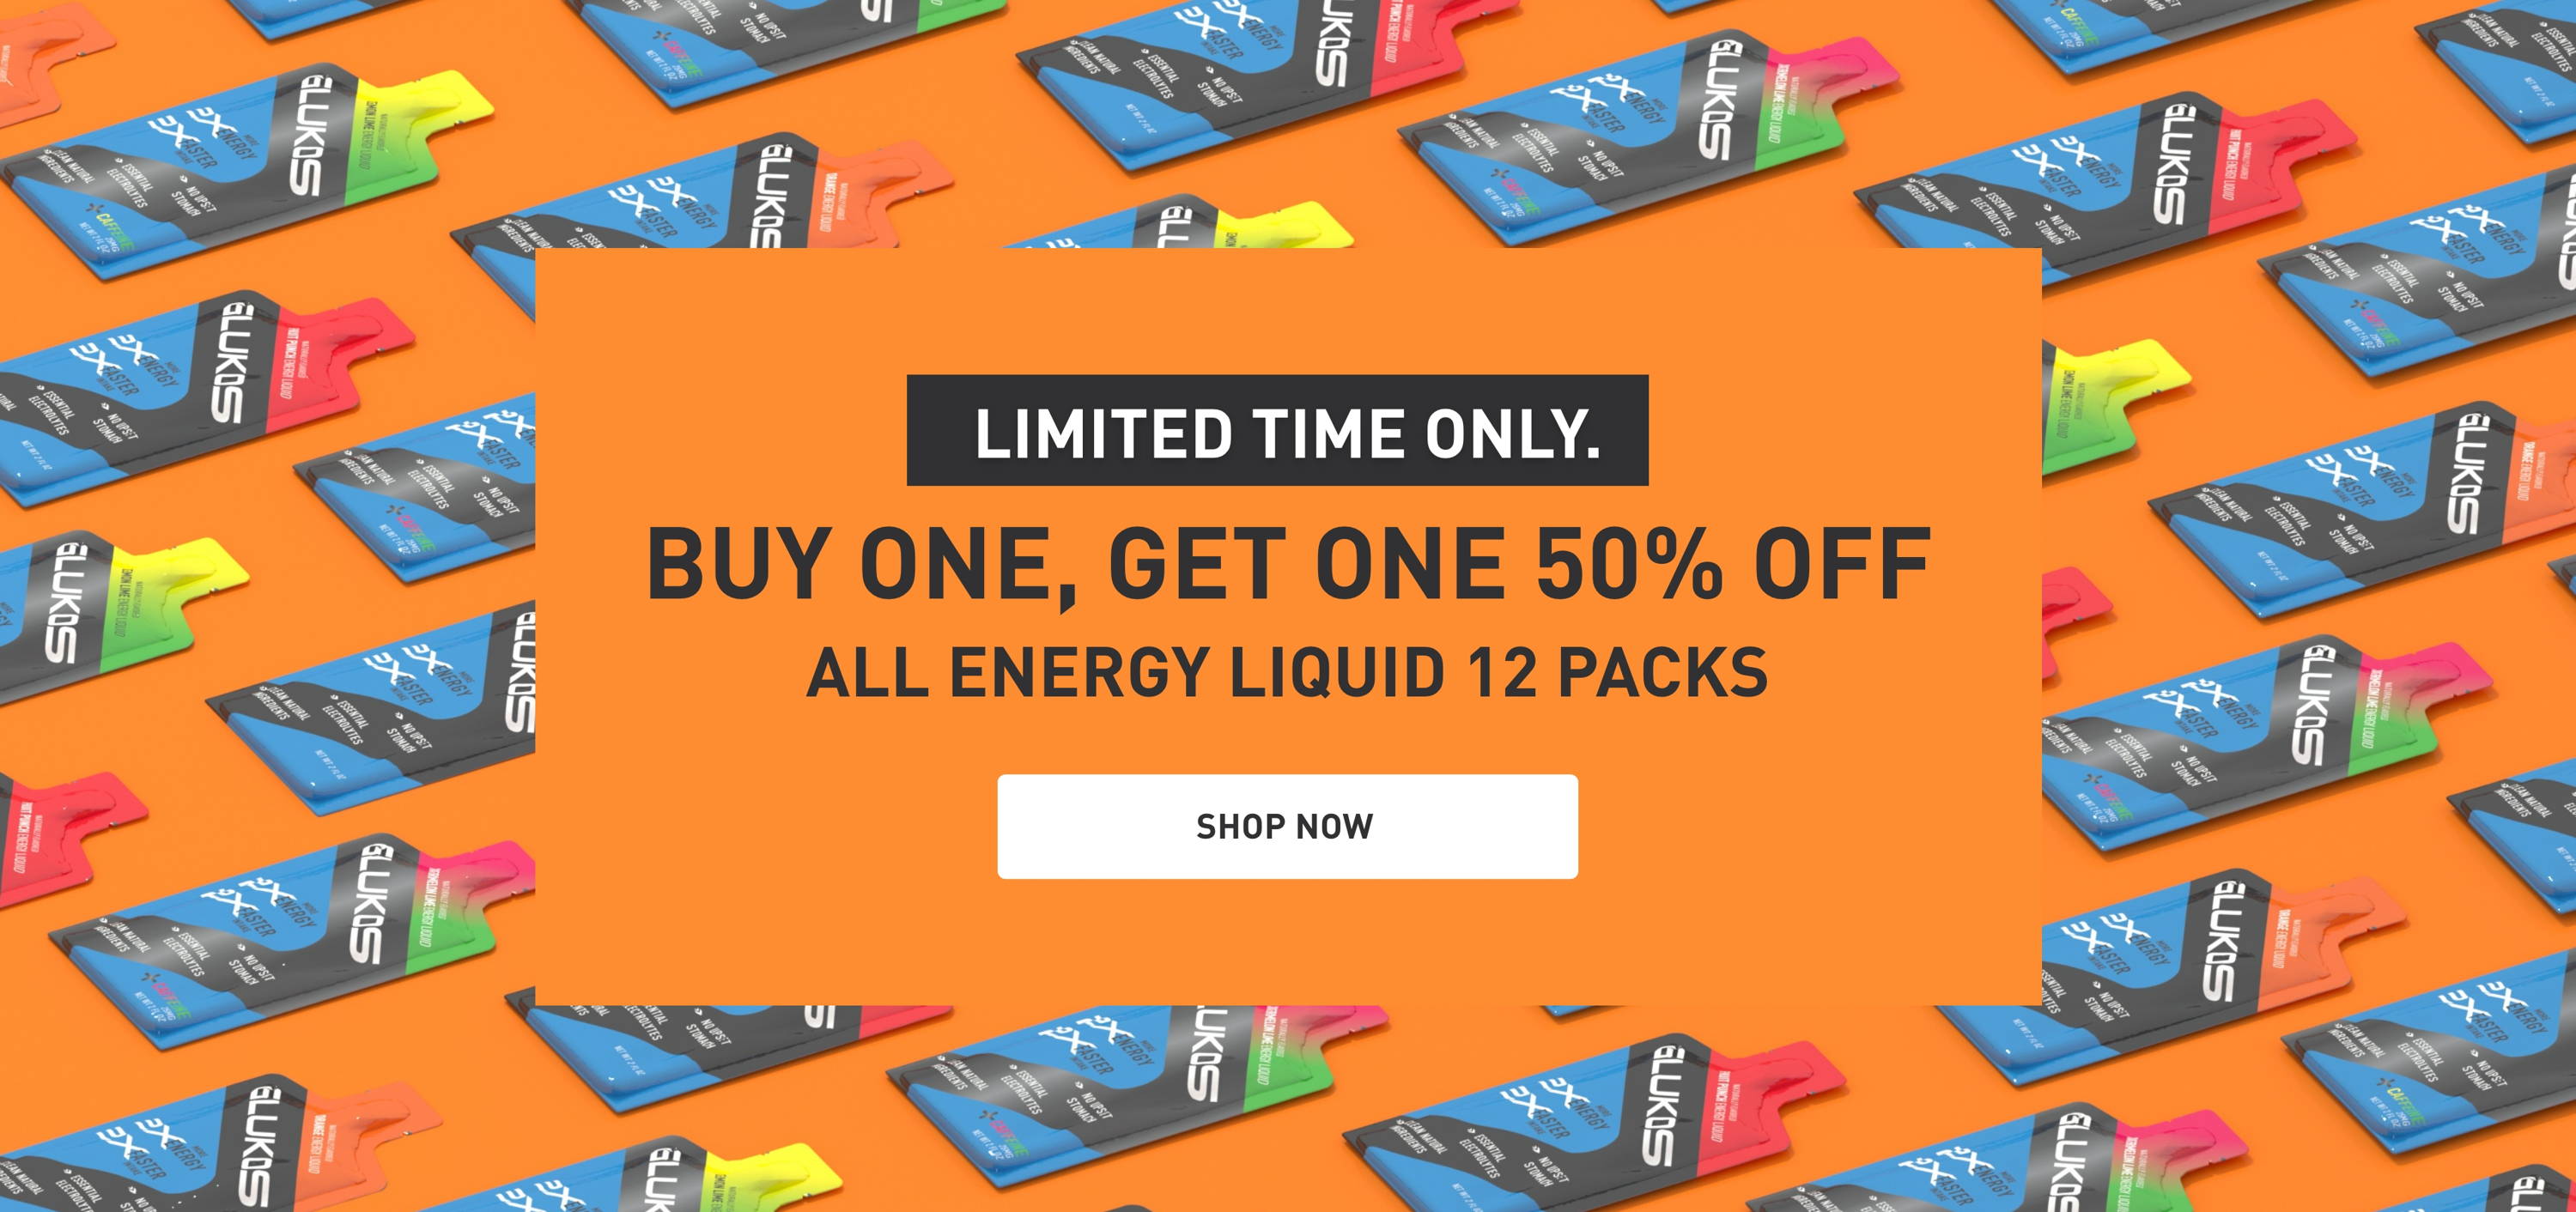 Limited Time Only. Buy One, Get One 50% Off All Energy Liquid 12 Packs SHOP NOW